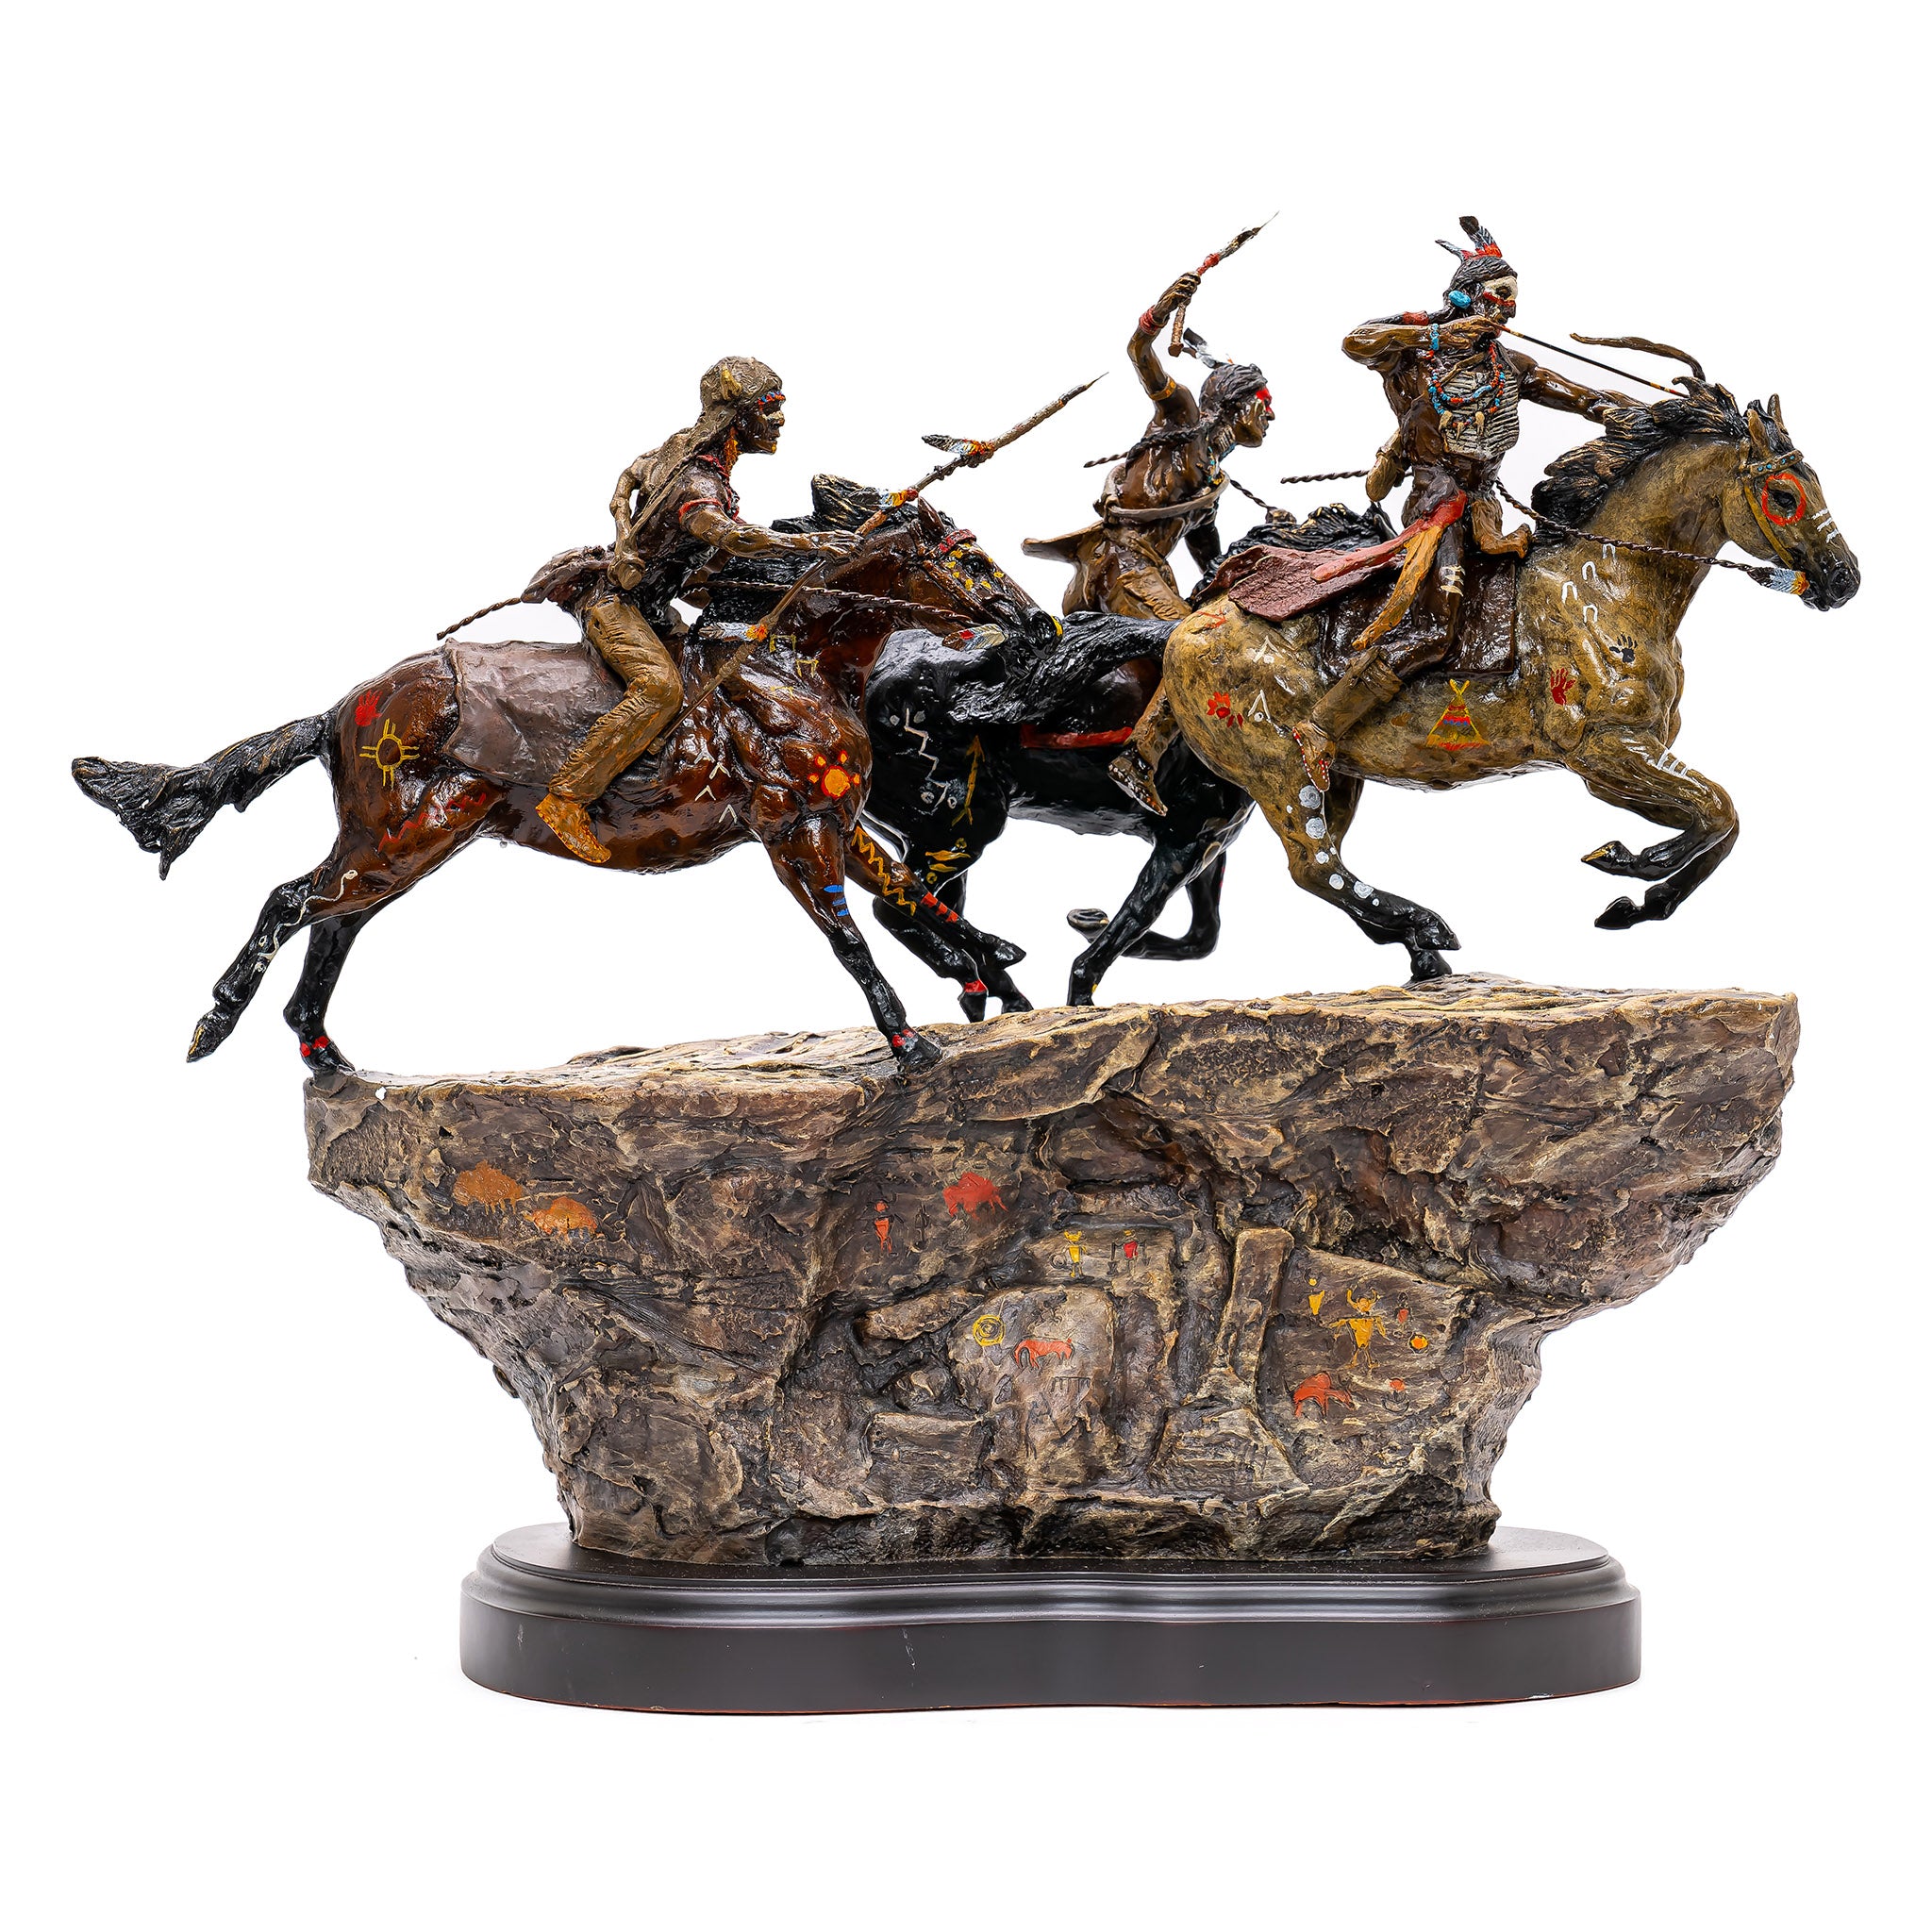 Limited Edition bronze sculpture by Ghiglieri. Signed & Numbered Hot Pursuit